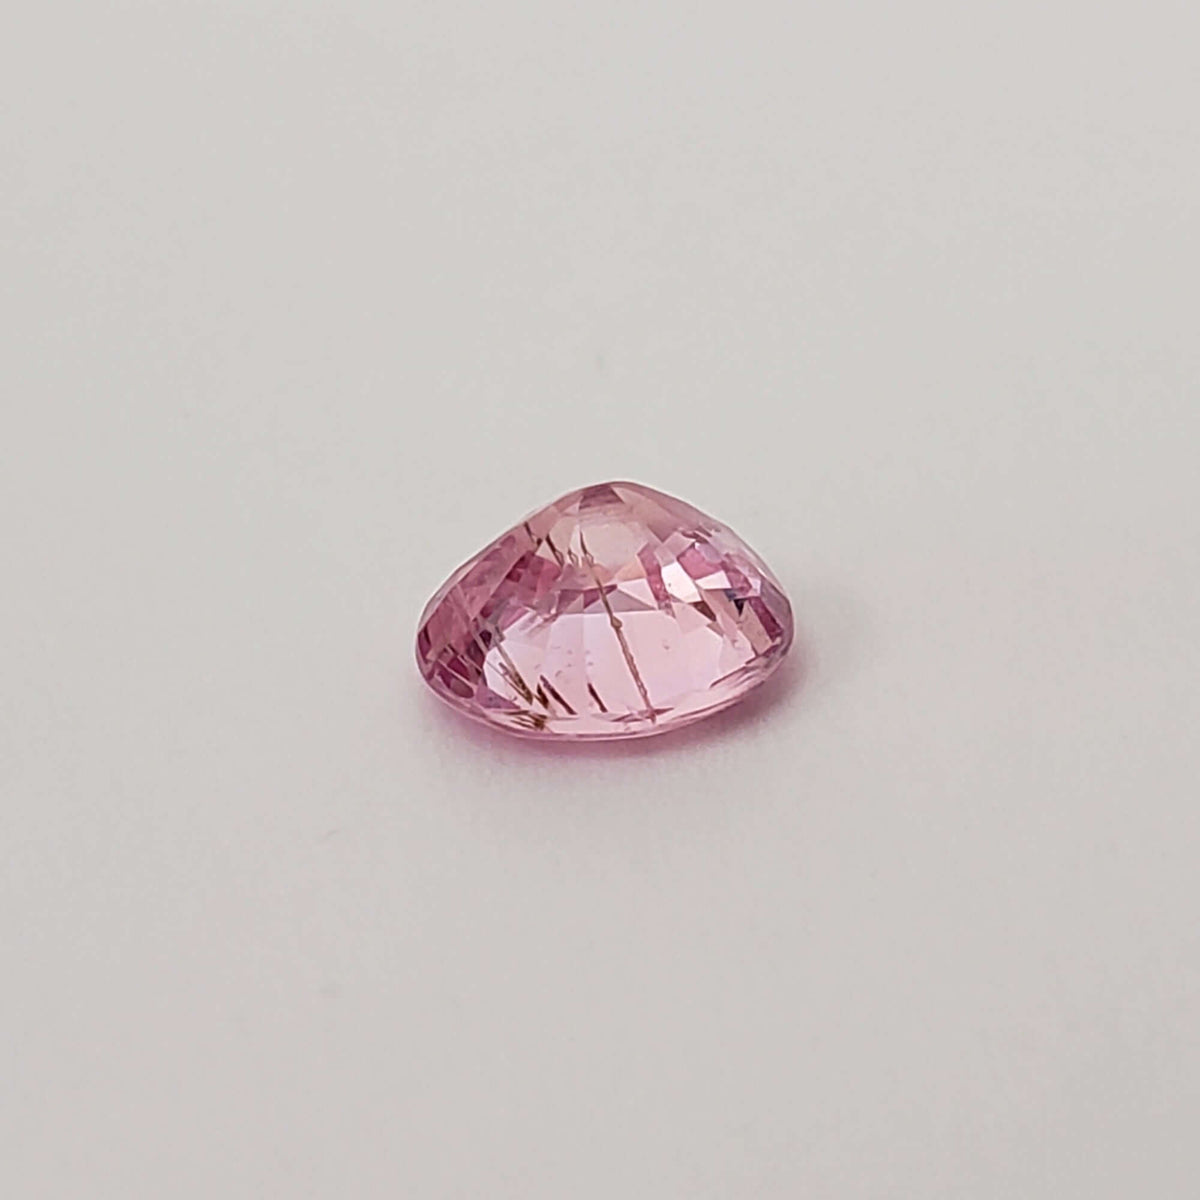 Rutile Sapphire | Oval Cut | Bright Pink | 7.5x6.5mm 1.75ct